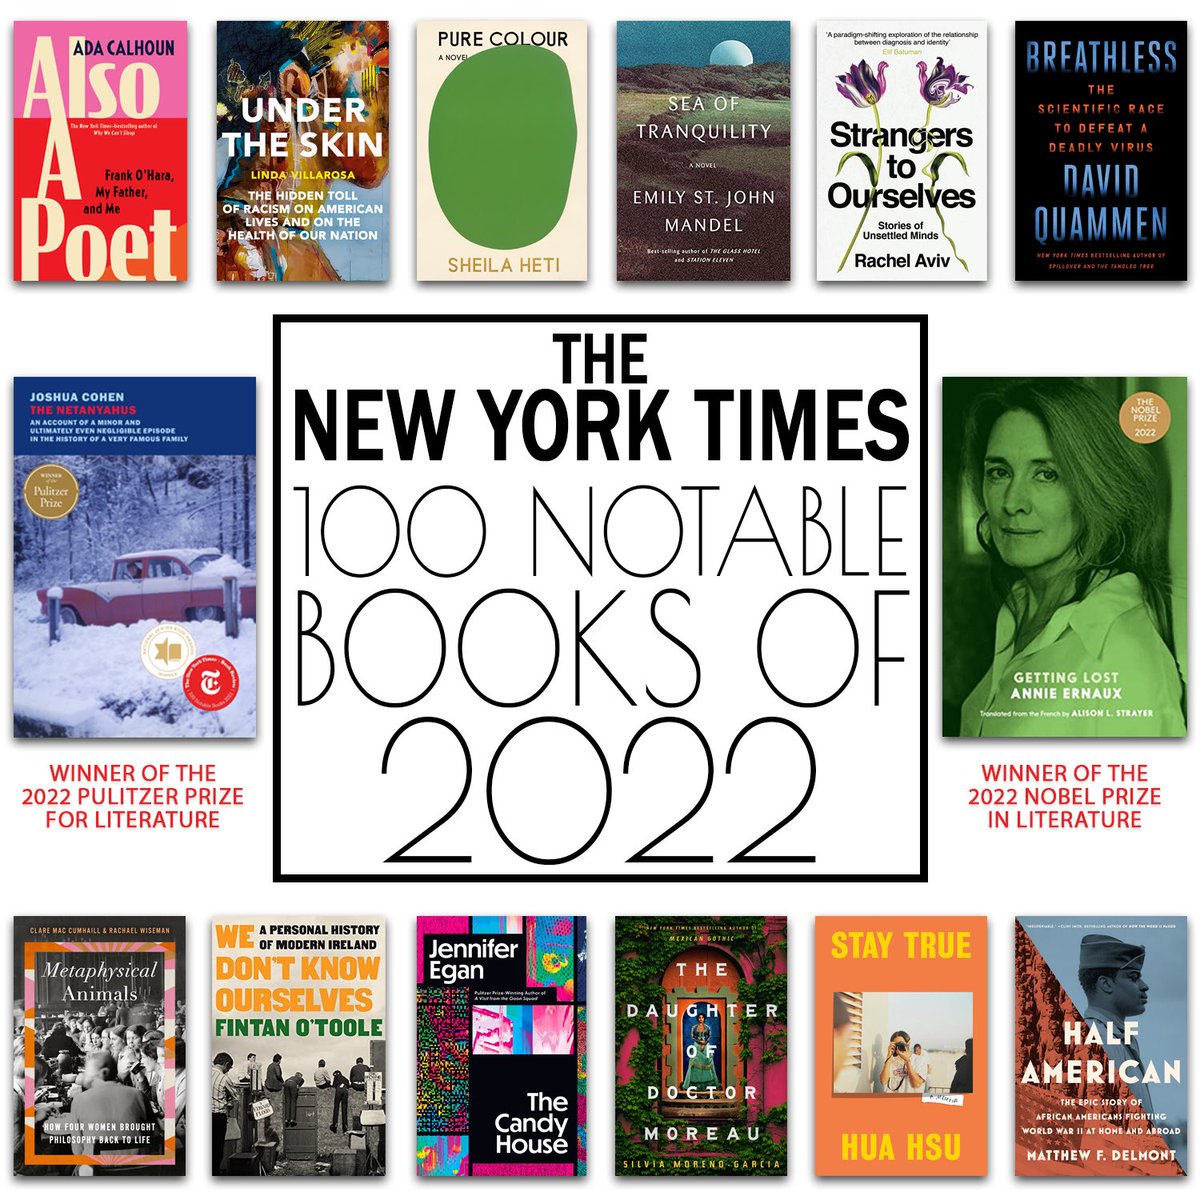 It’s that time of year again! Catch up on your “Best of 2022” reading with titles from our print collection or audio & ebooks on the SORA app! Visit our “Best of…” guide for more recommendations! (Link in bio) #nytimesbooks #pulitzerprize #nobelprize #librarybooks #winterreads